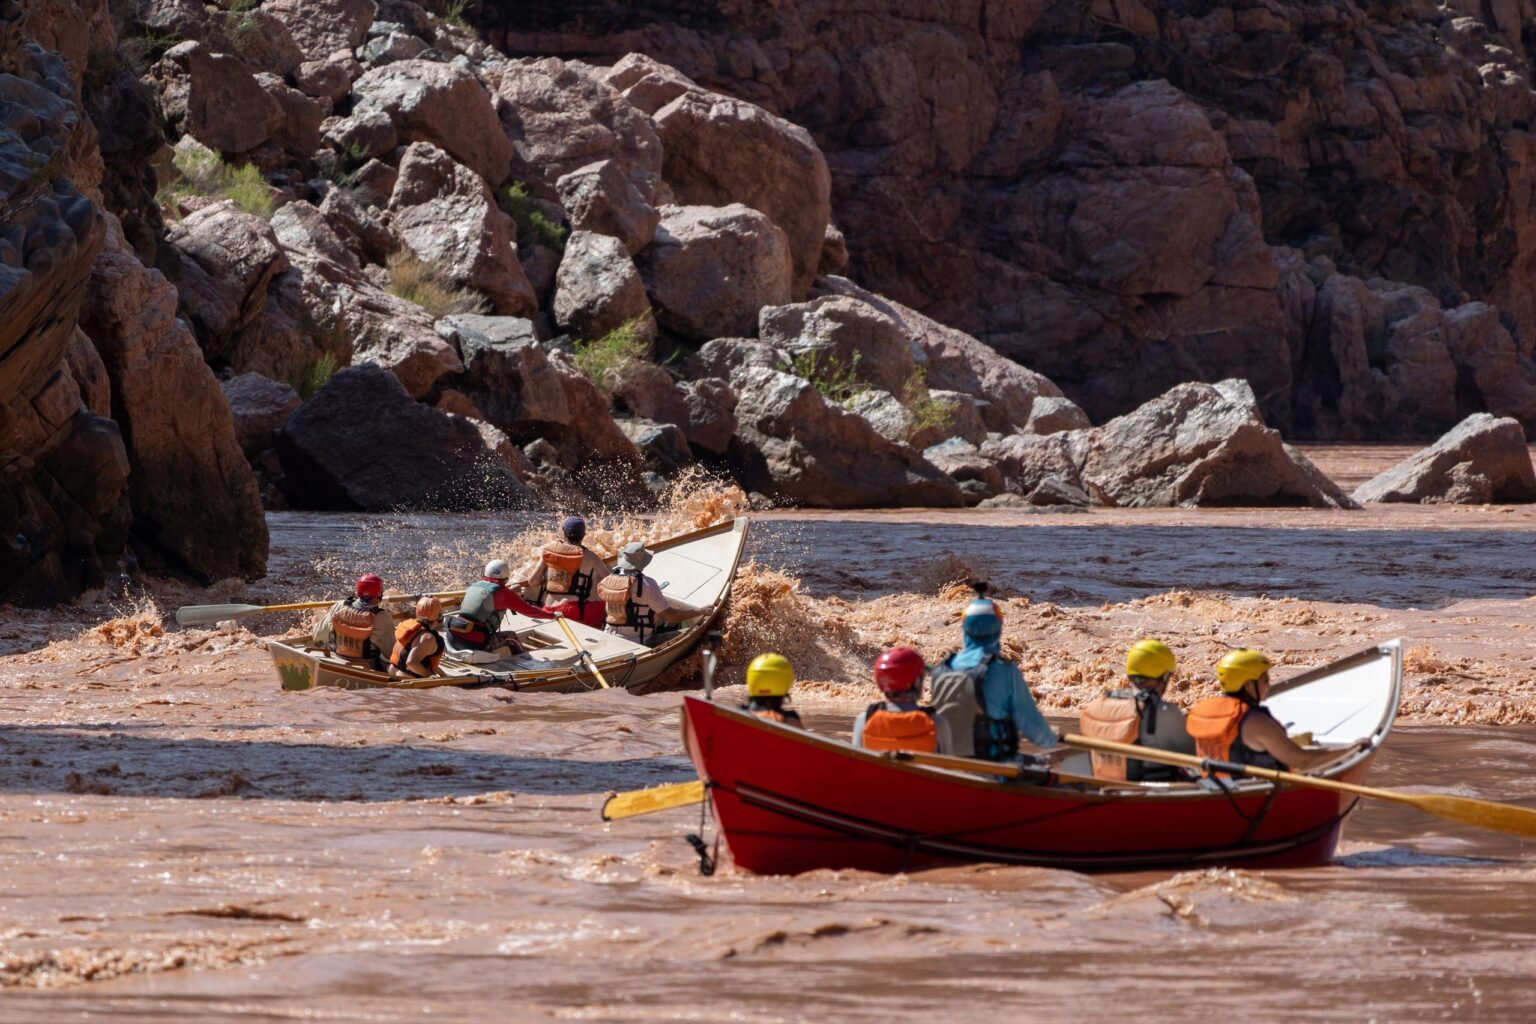 A pair of OARS dories going through a rapid on the Colorado River